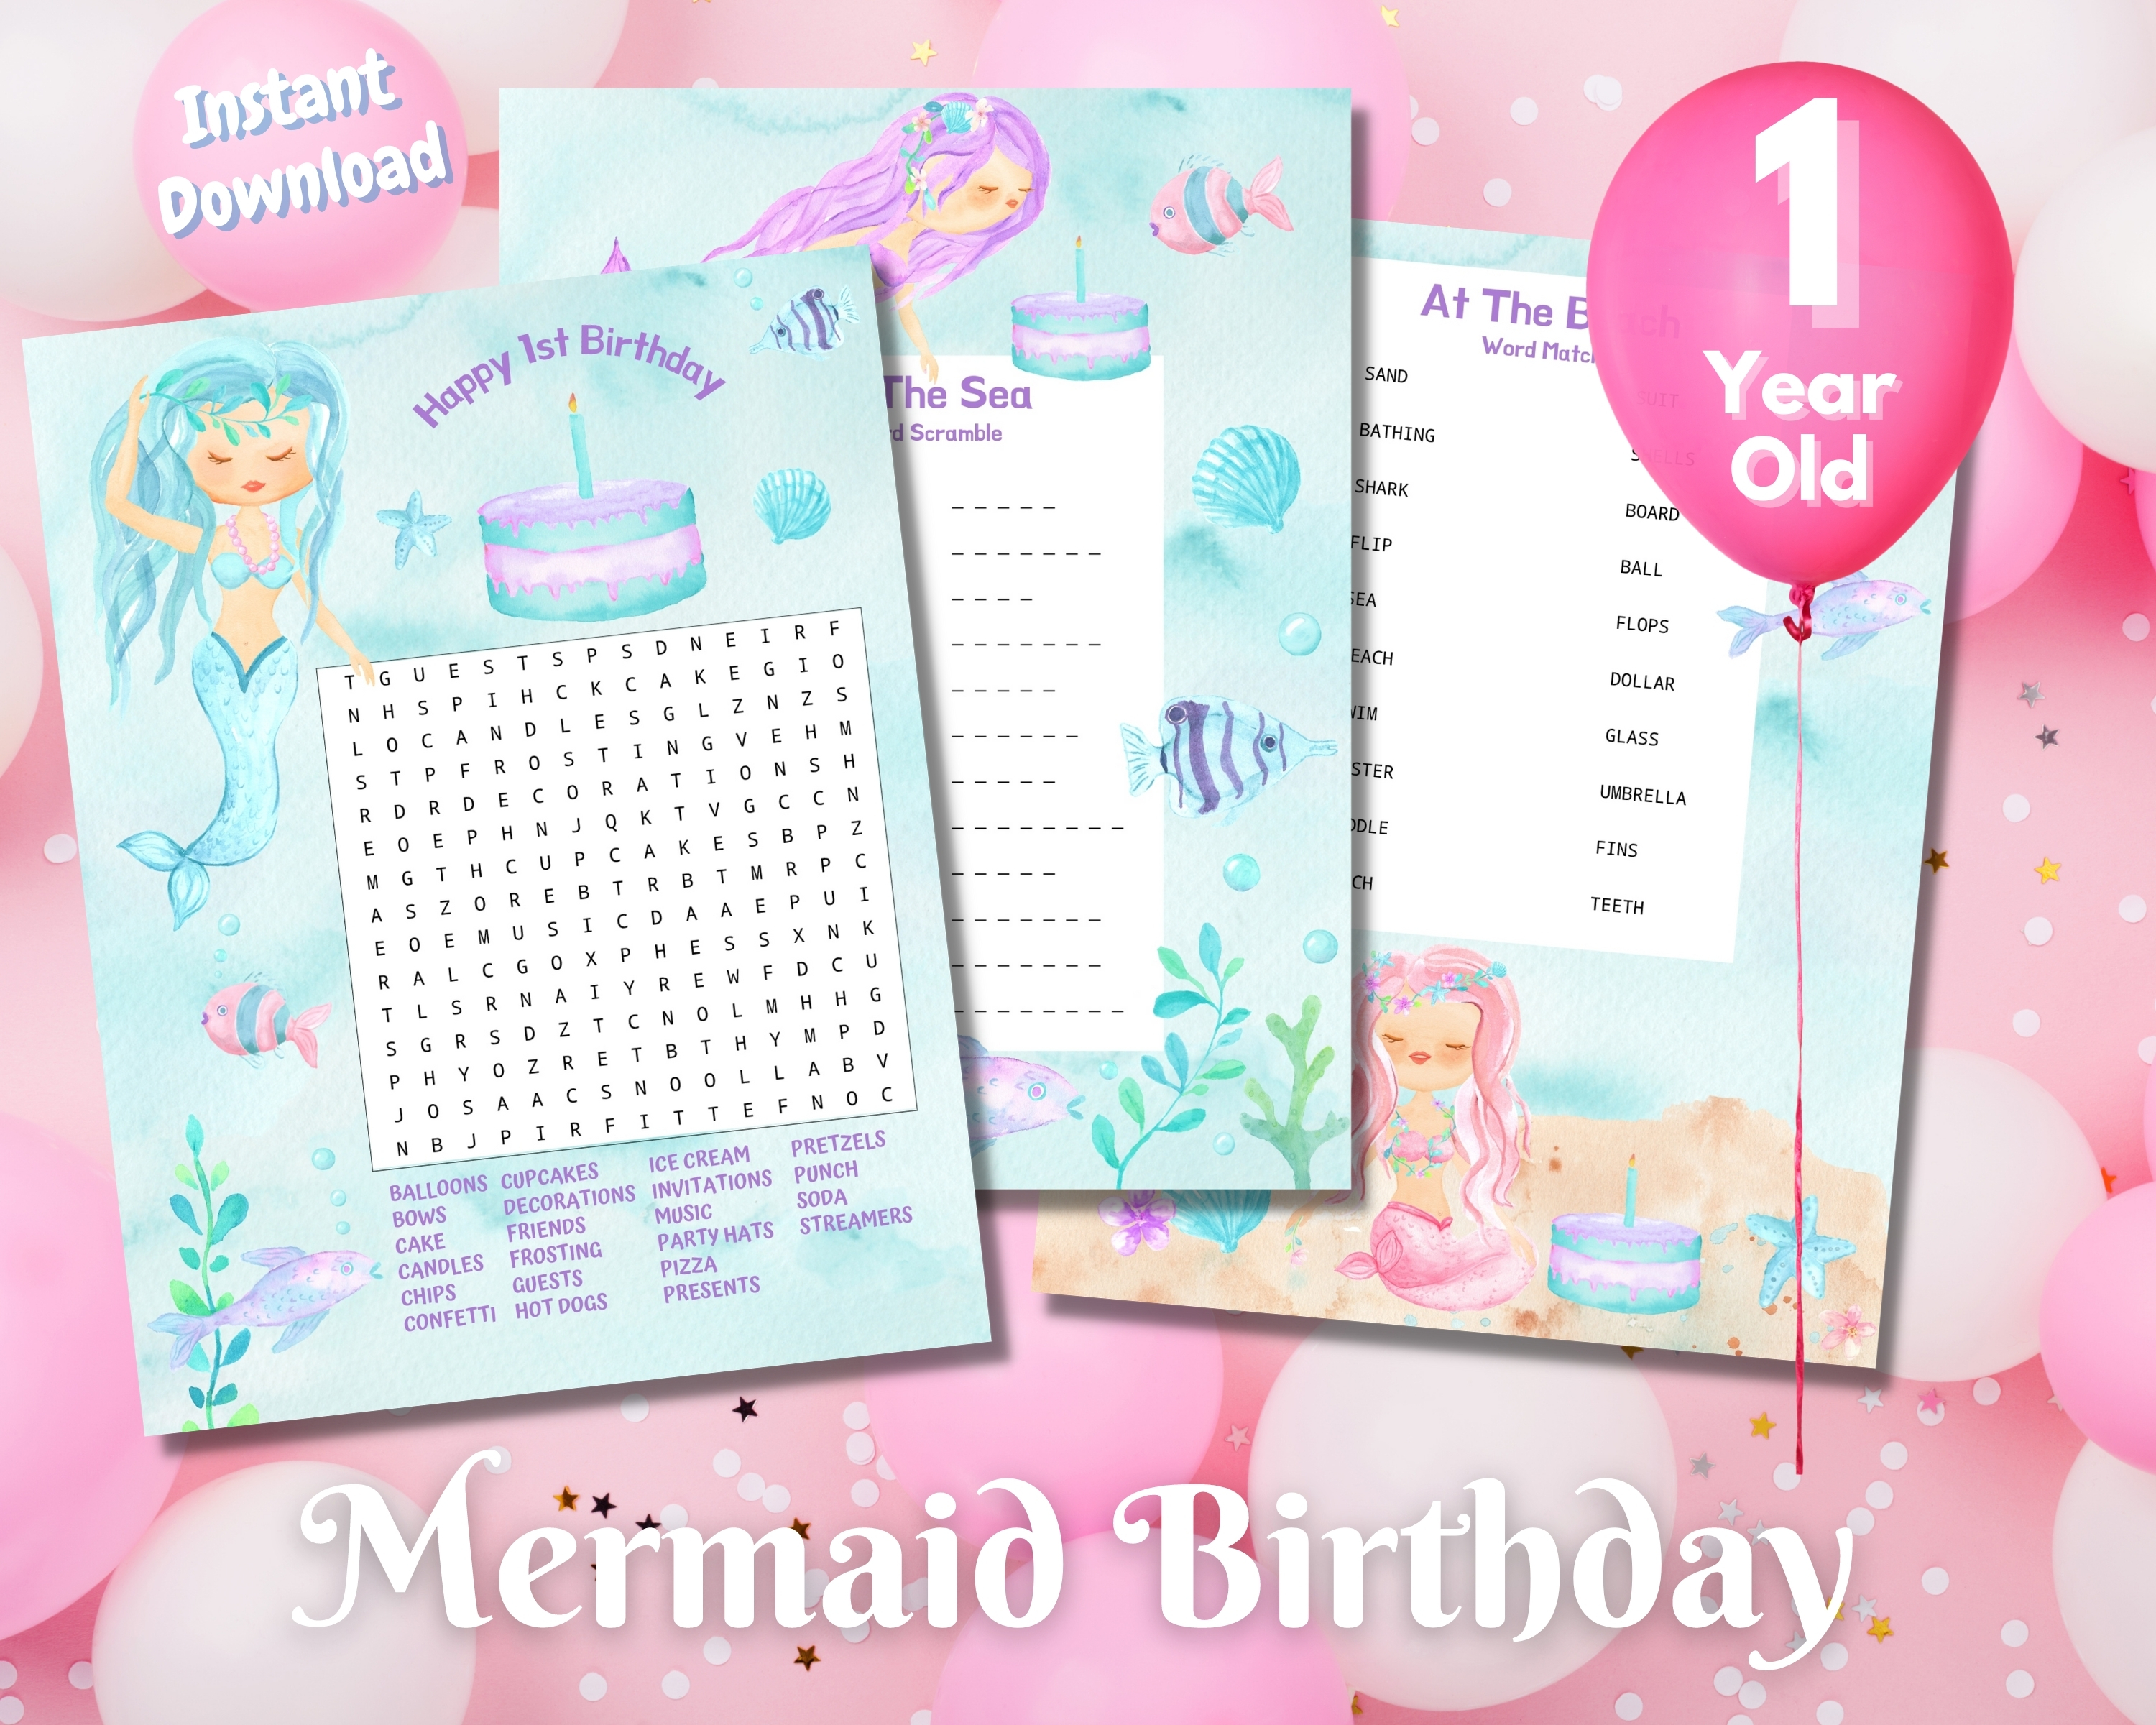 First Mermaid Birthday Word Puzzles - Light Complexion